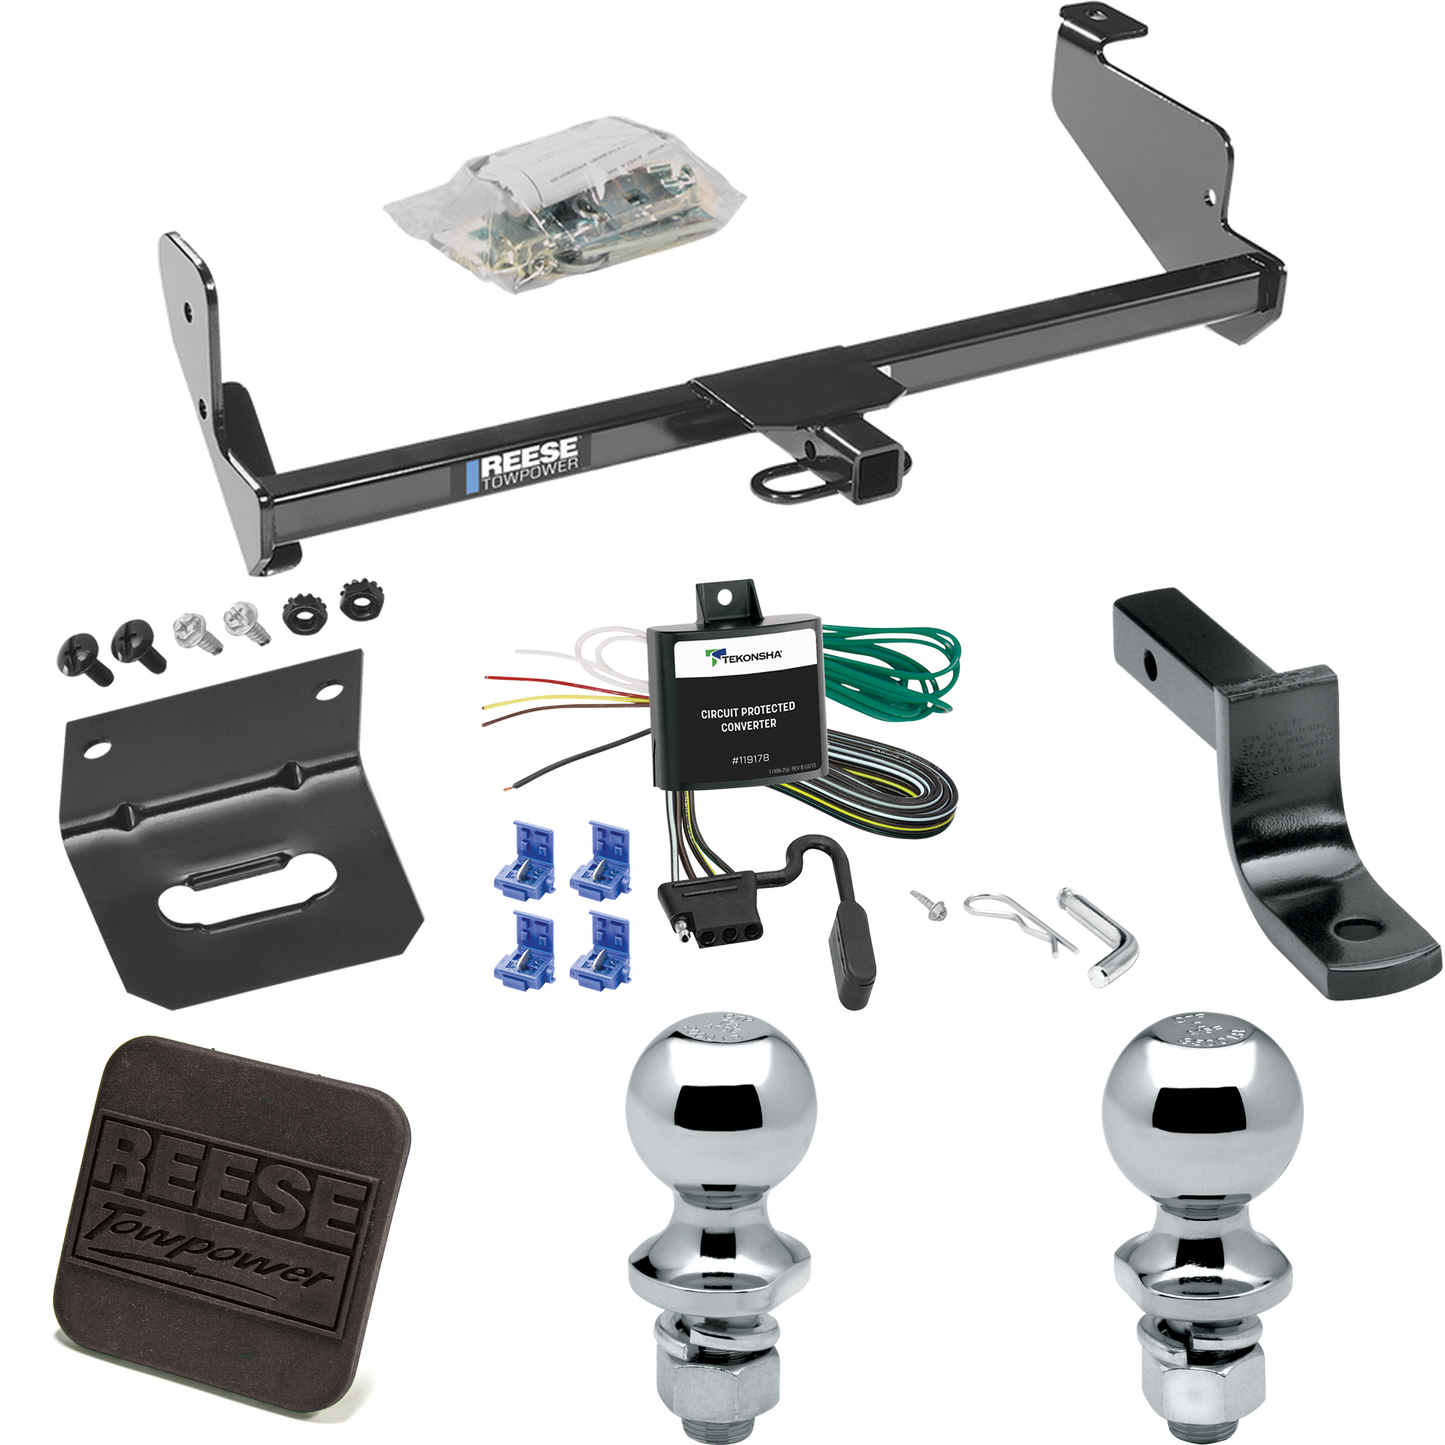 Fits 2000-2000 Ford Focus Trailer Hitch Tow PKG w/ 4-Flat Wiring Harness + Draw-Bar + 1-7/8" + 2" Ball + Wiring Bracket + Hitch Cover (For Sedan Models) By Reese Towpower